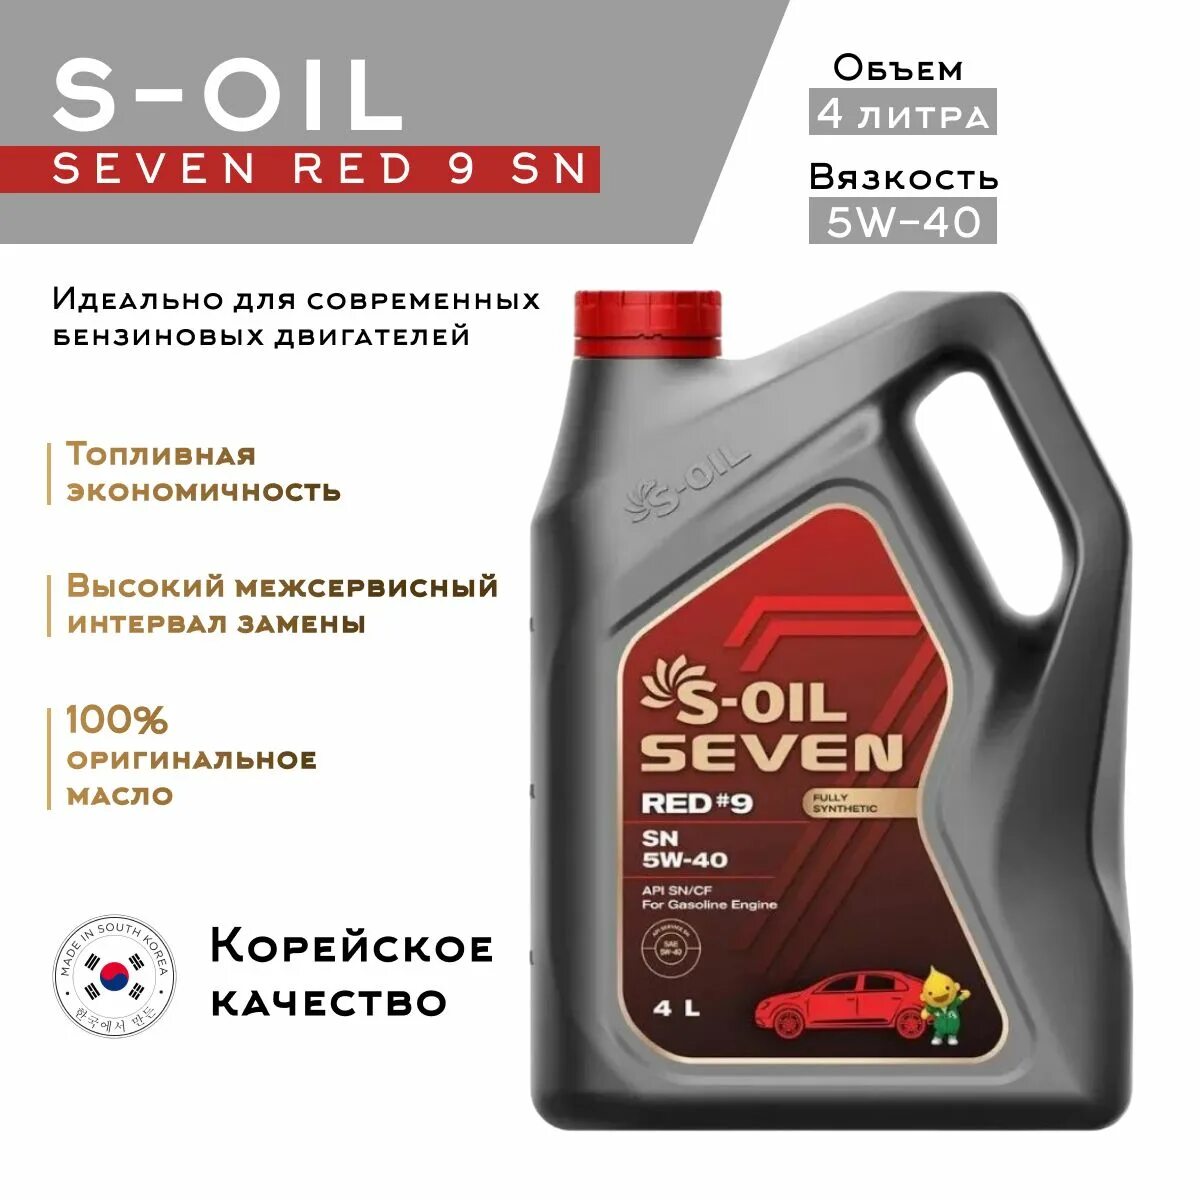 Масло севен. S-Oil Seven 5w-30. Моторное масло Ойл Севен. S-Oil Seven 5w-30 Gold 9. S Oil Red 9 5w30.